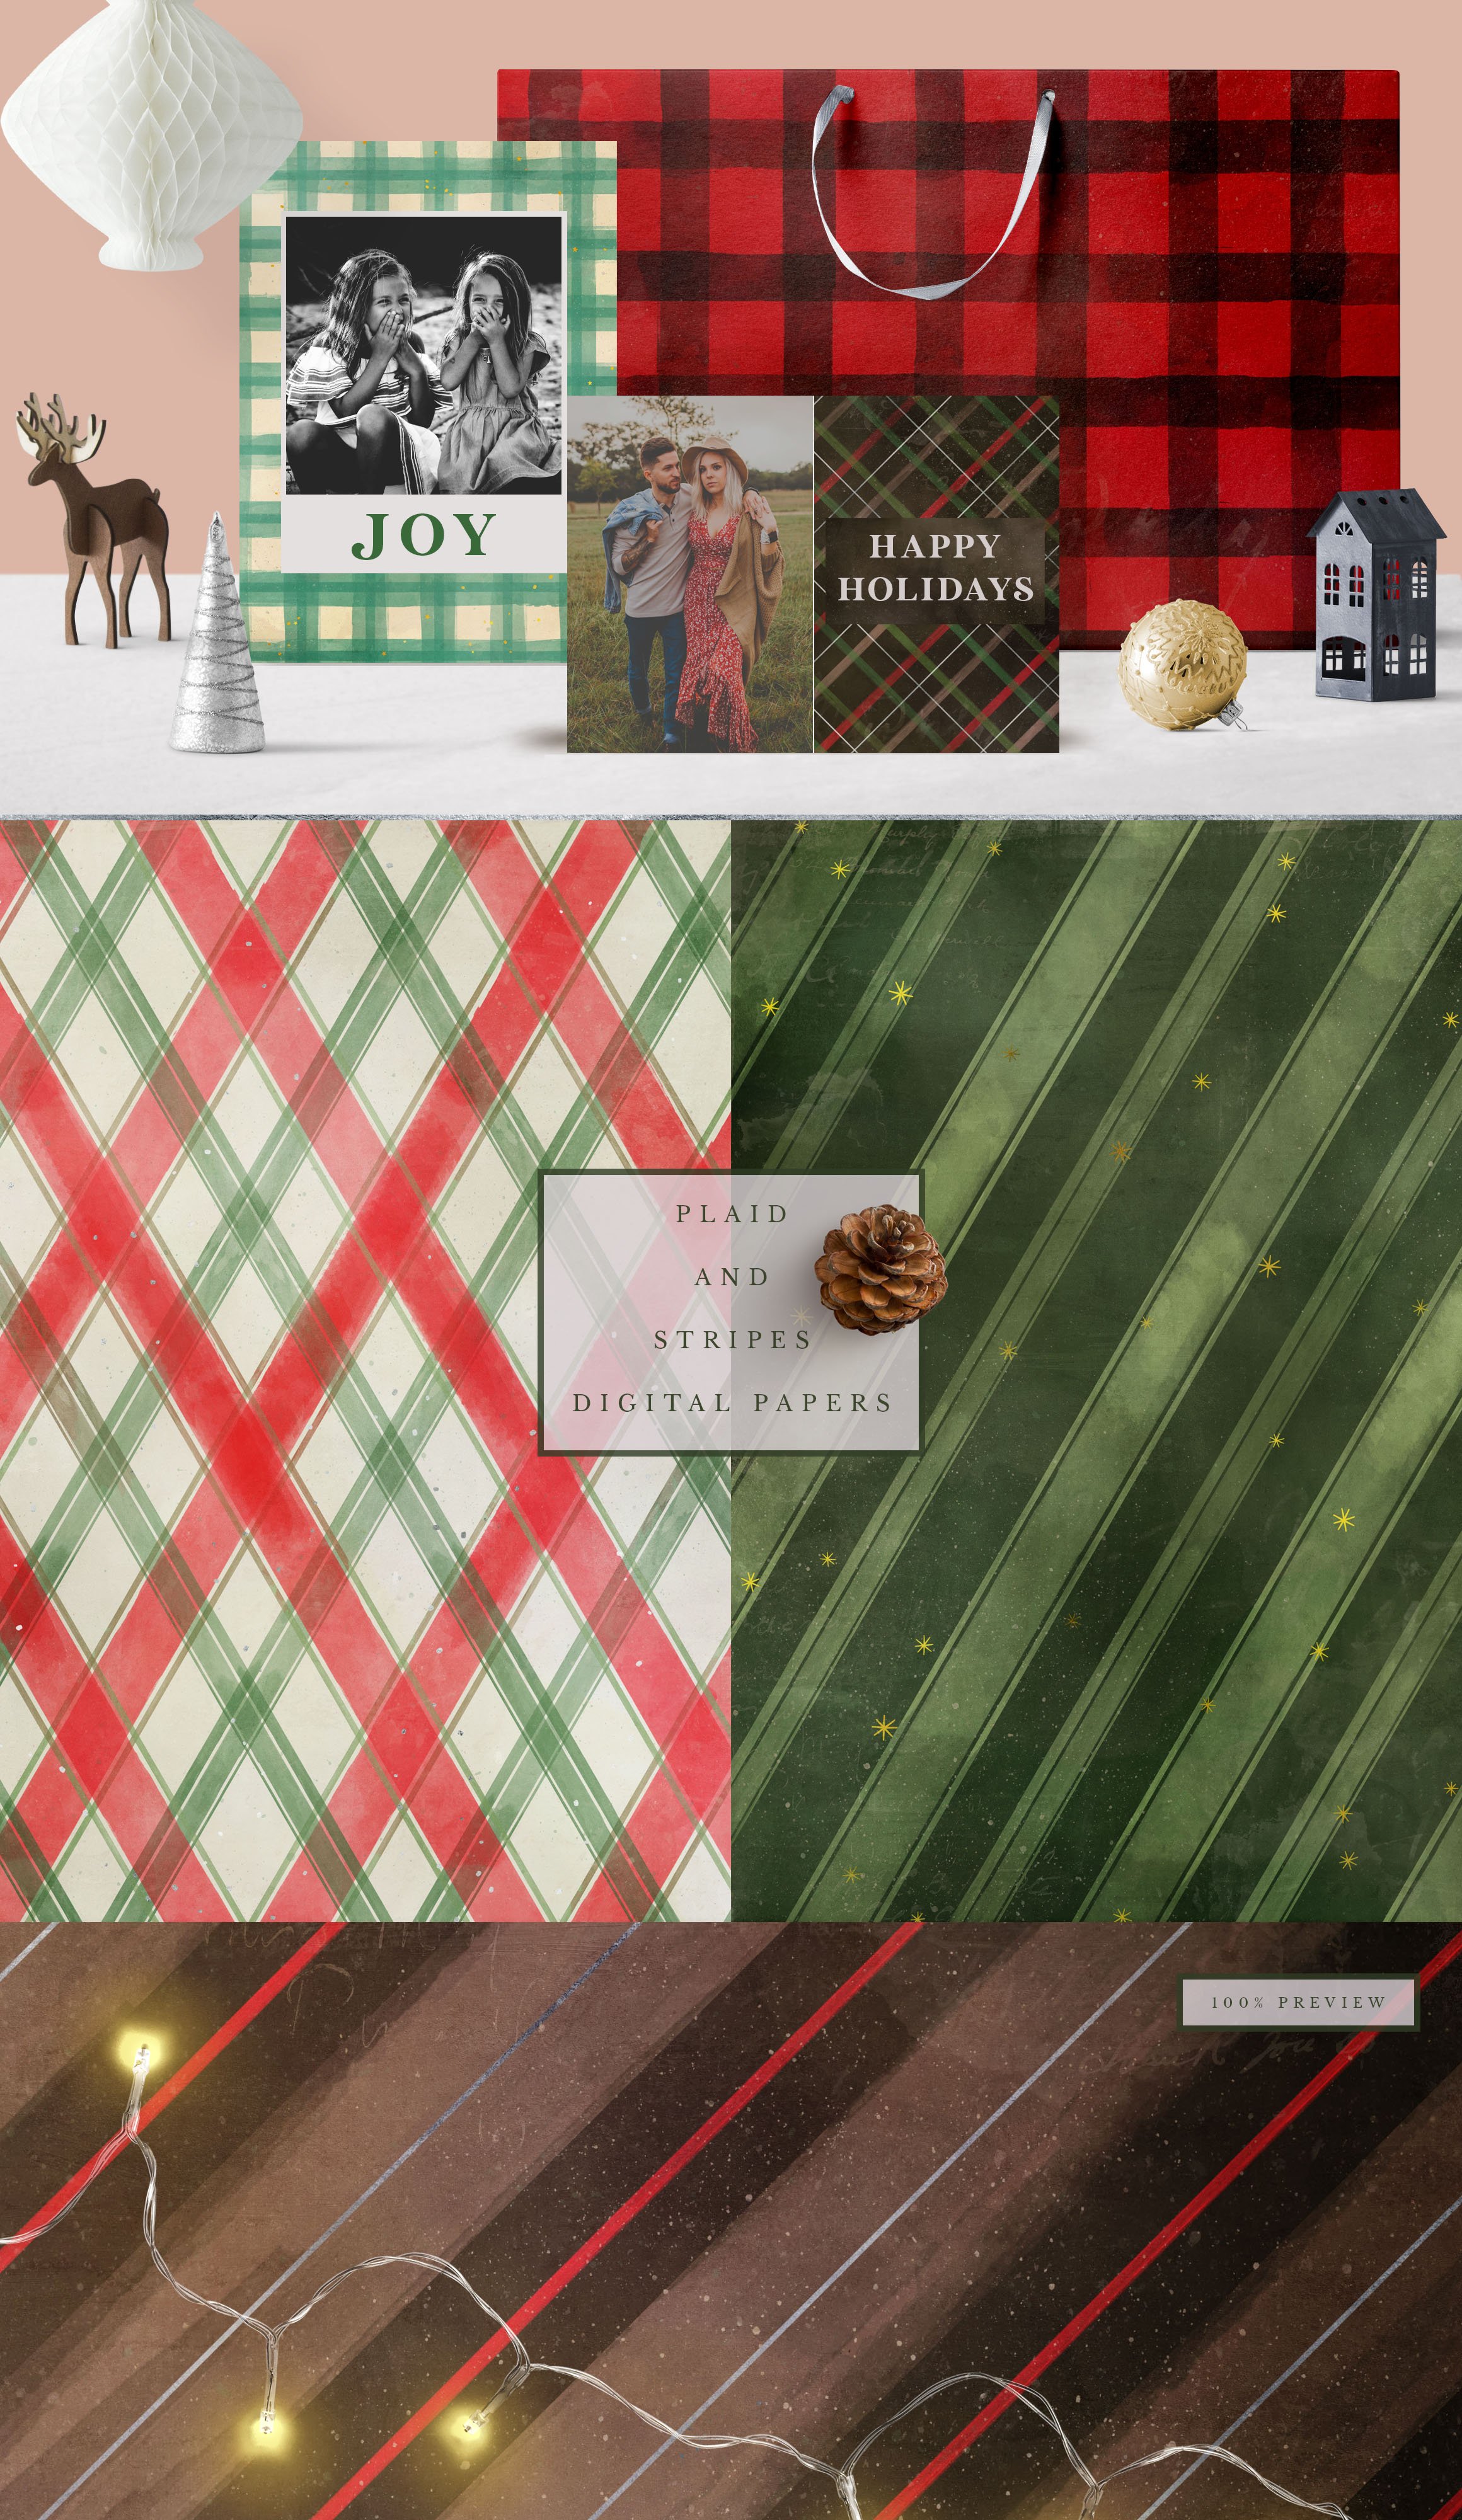 Classic Christmas Digital Papers